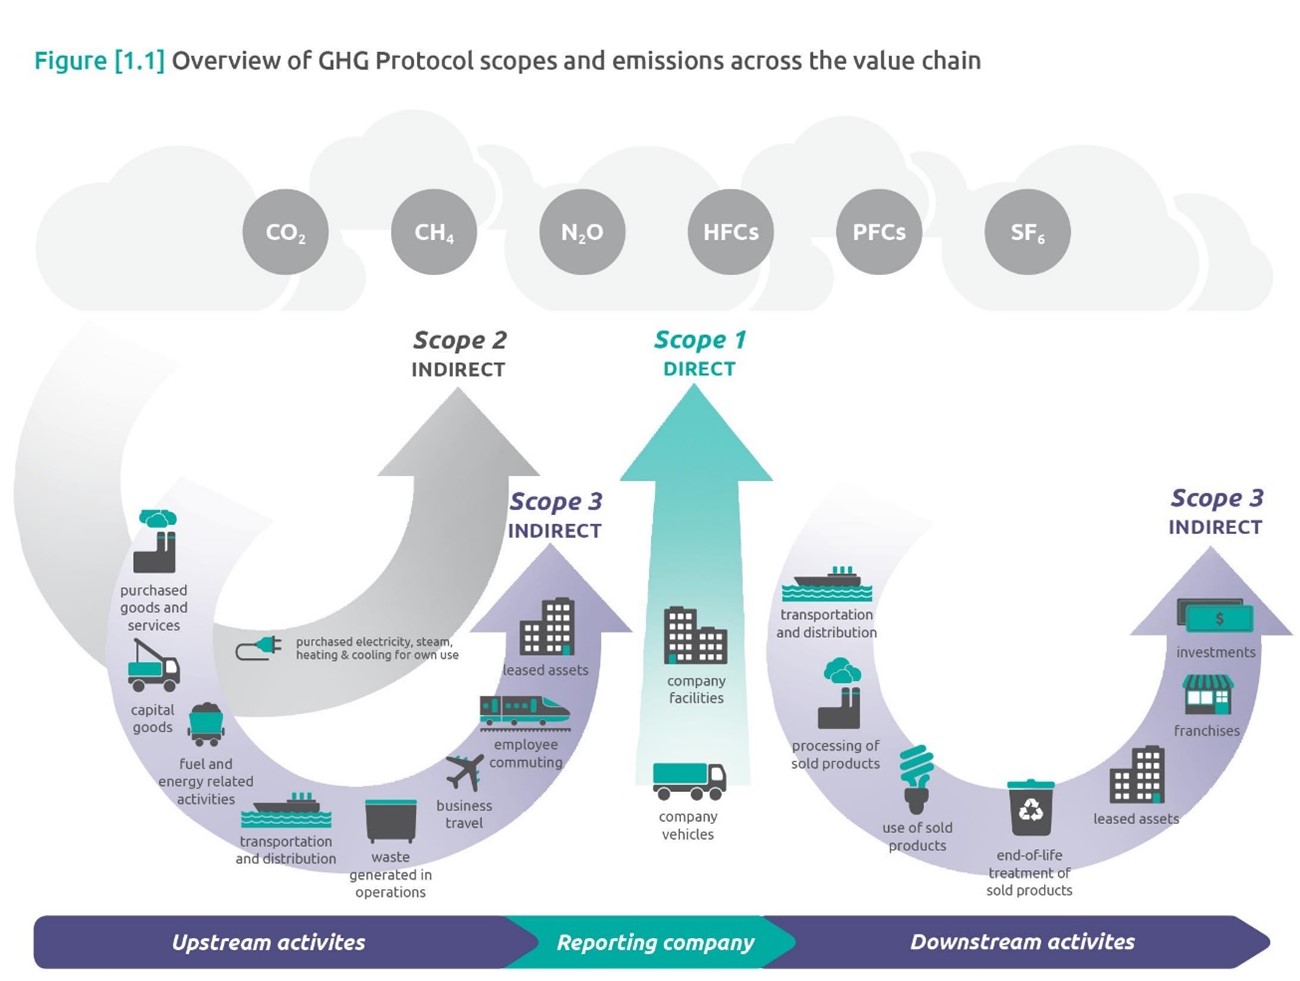 ghg protocol scopes and emissions across the value chain